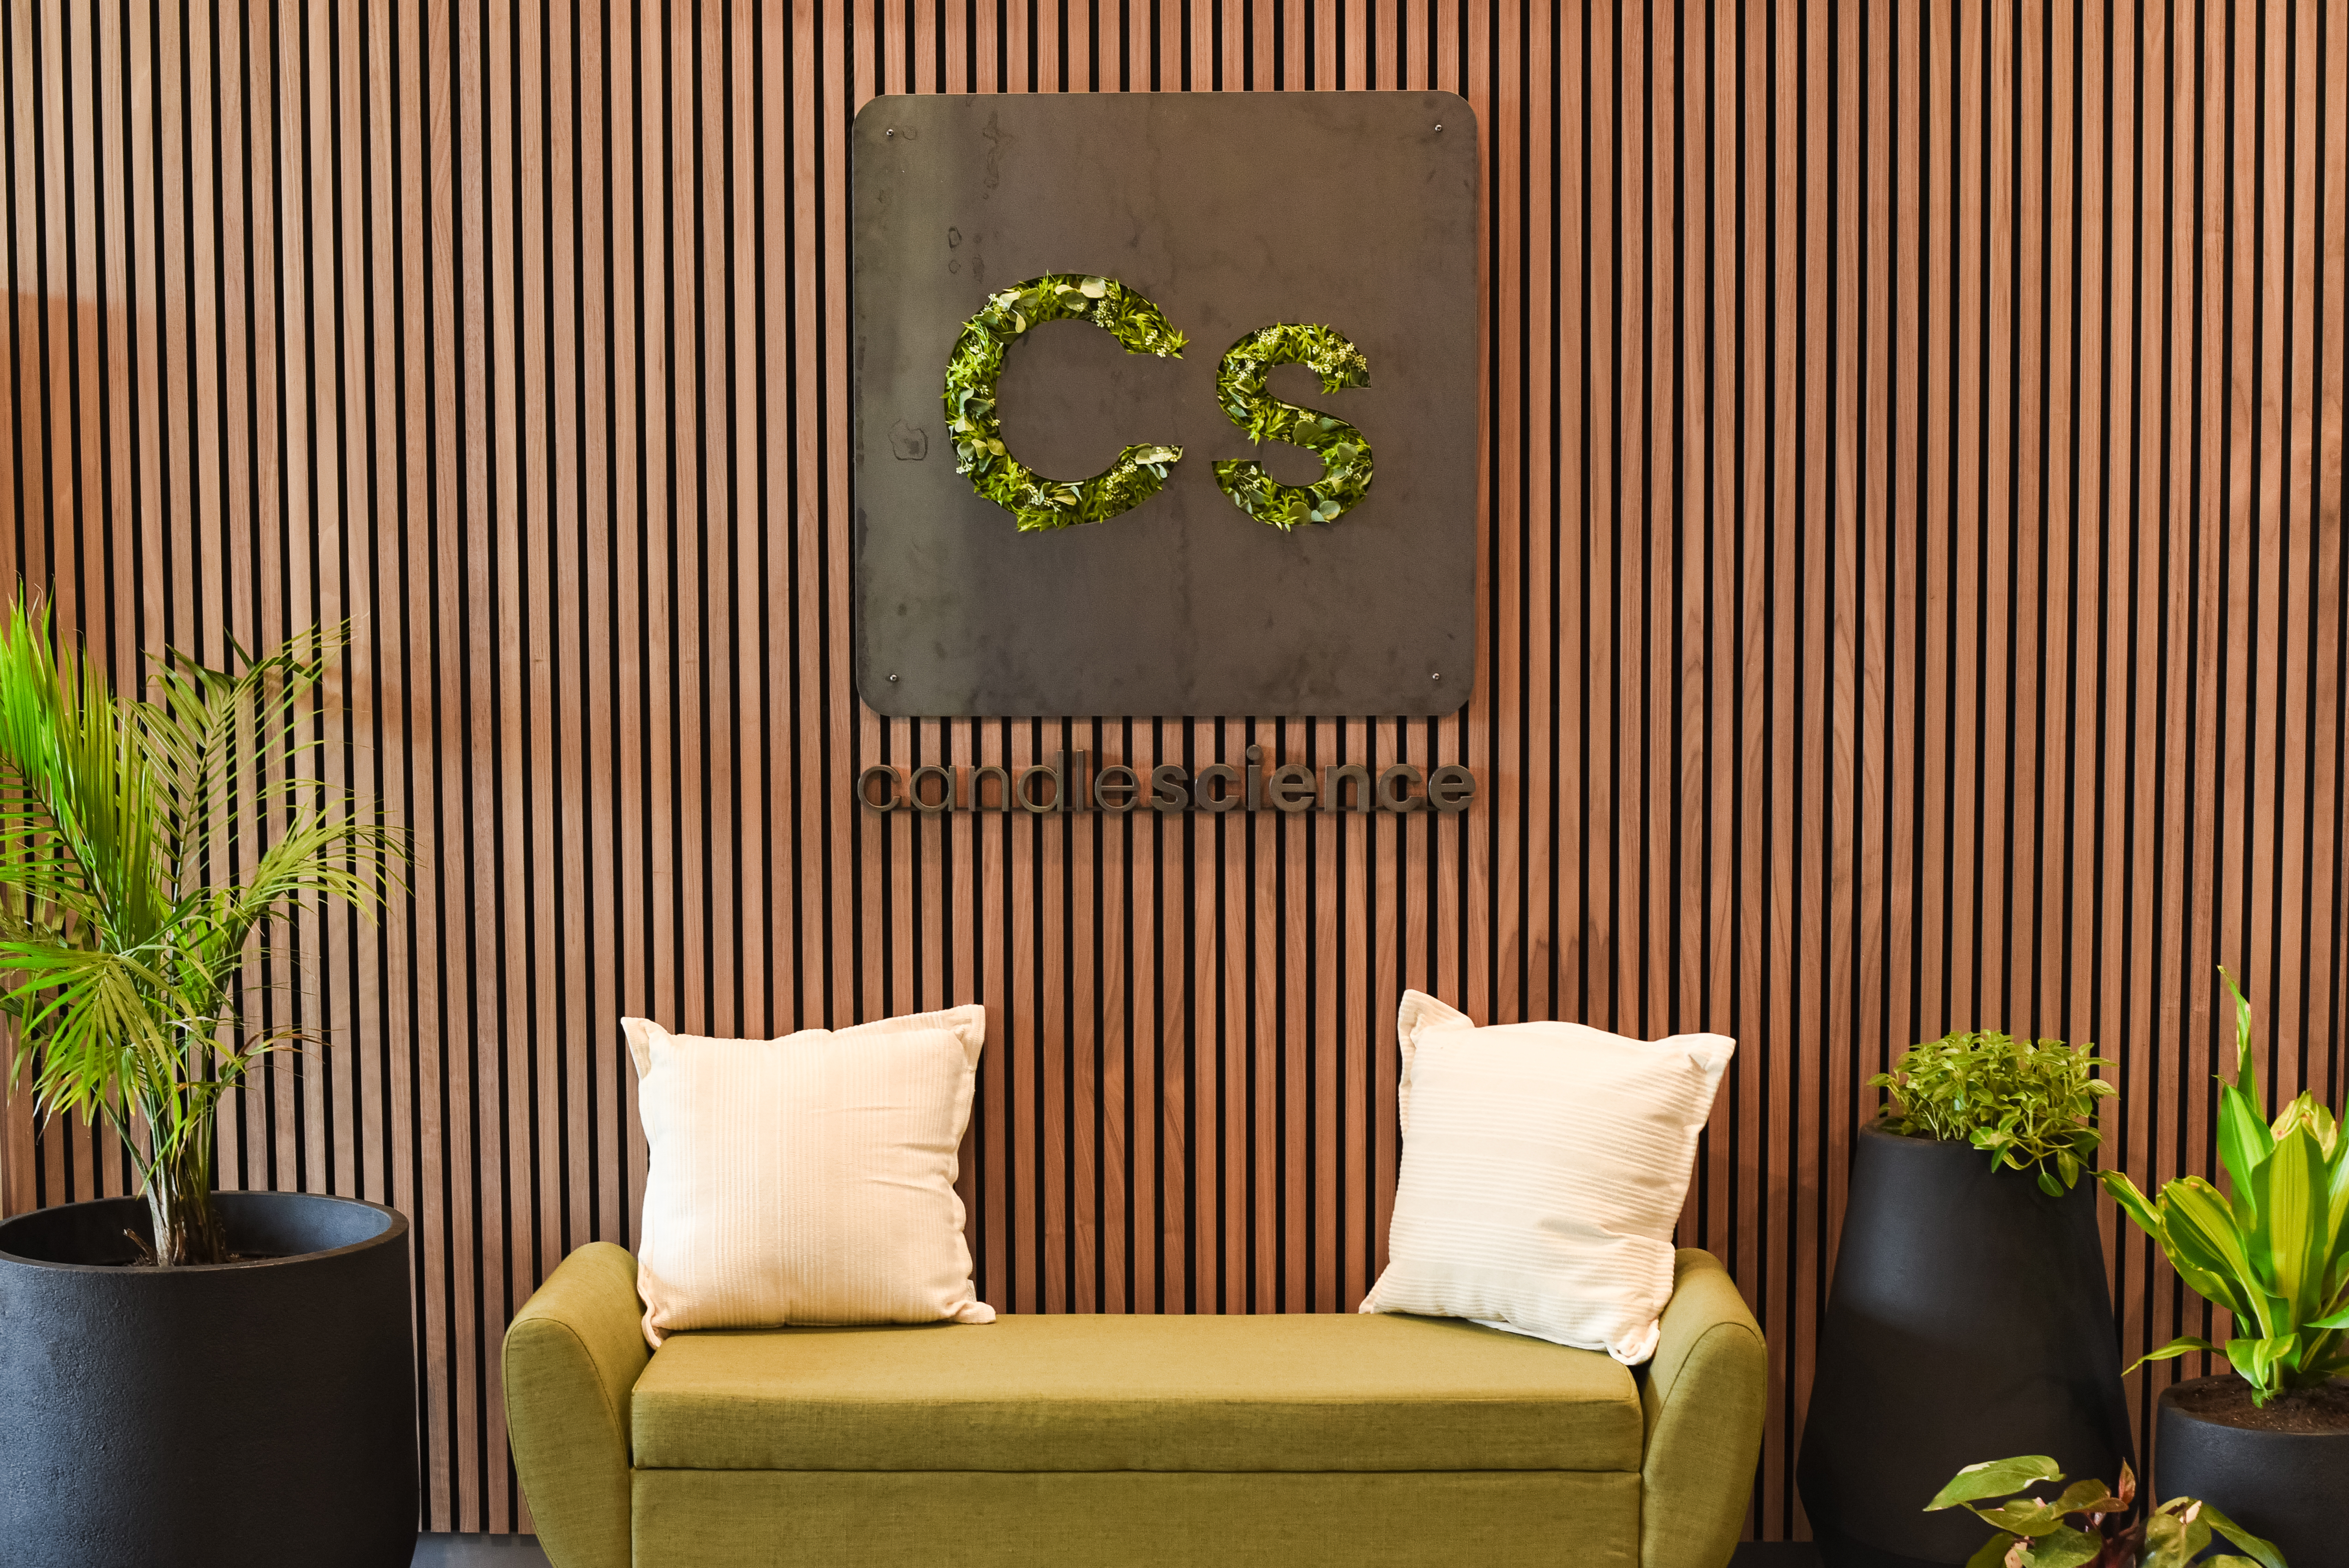 A green couch with two white pillows on each side of it. Planters with green tropical plants surround the couch, and a sign on the wall reads "Cs, candlescience."